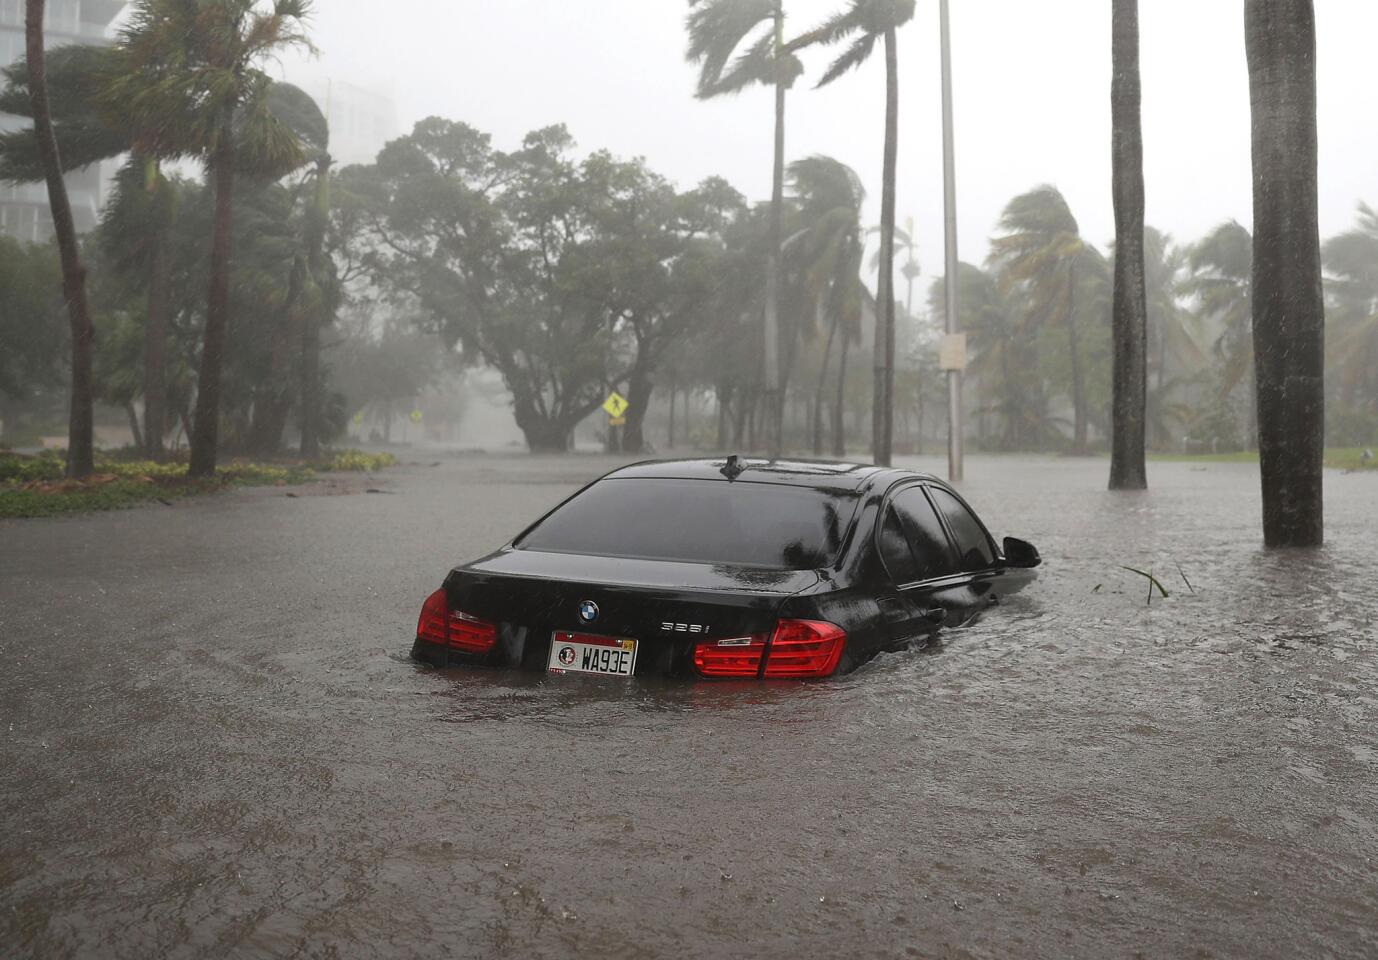 A car is seen in a flooded street as Hurricane Irma passes through Miami on Sept. 10, 2017.